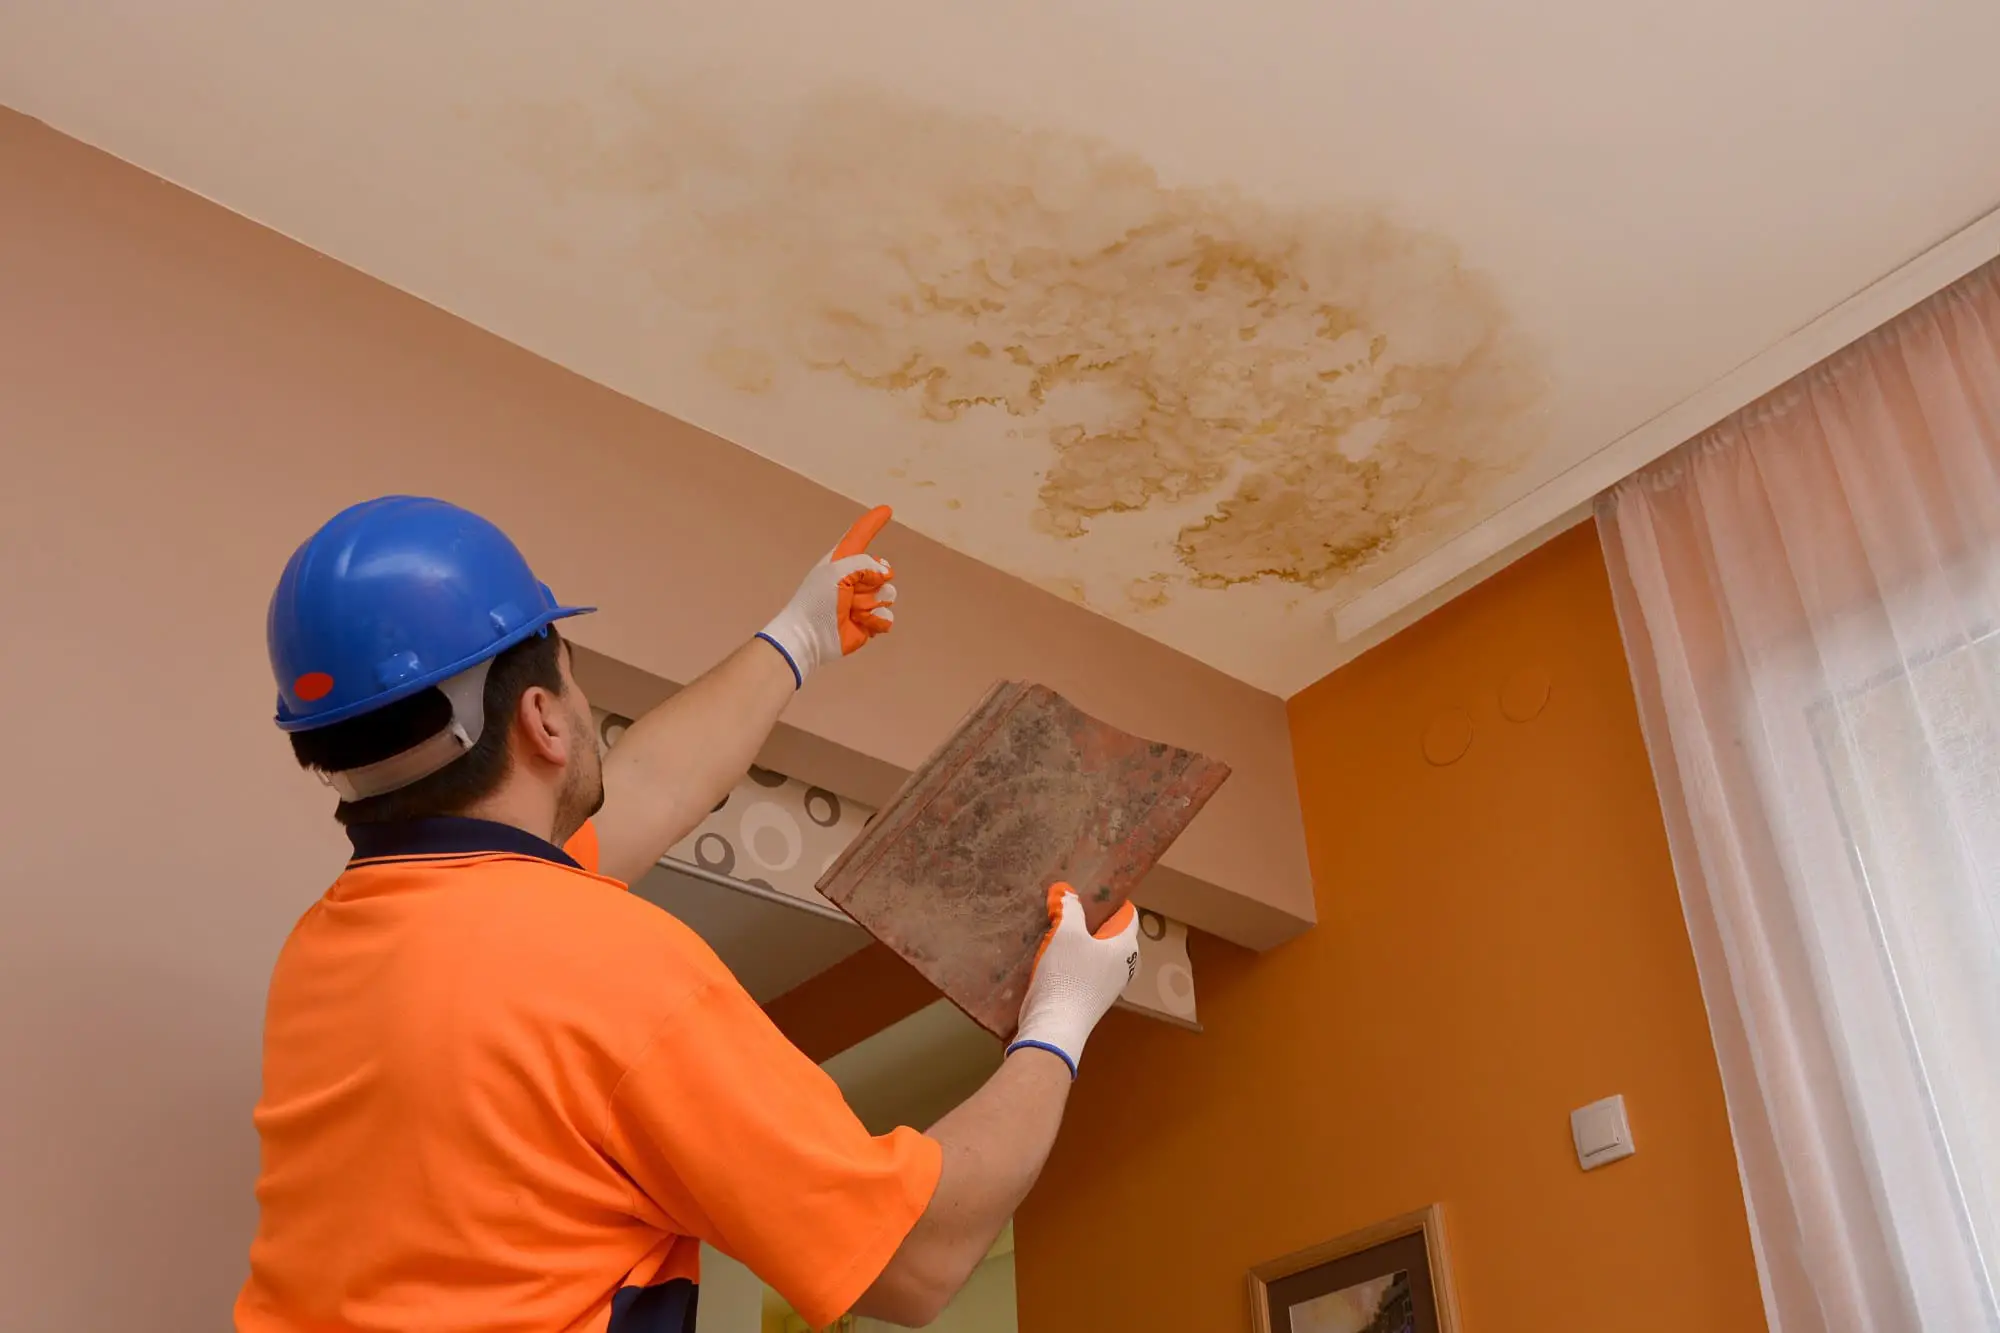 A Guide to the Different Types of Ceiling Damage